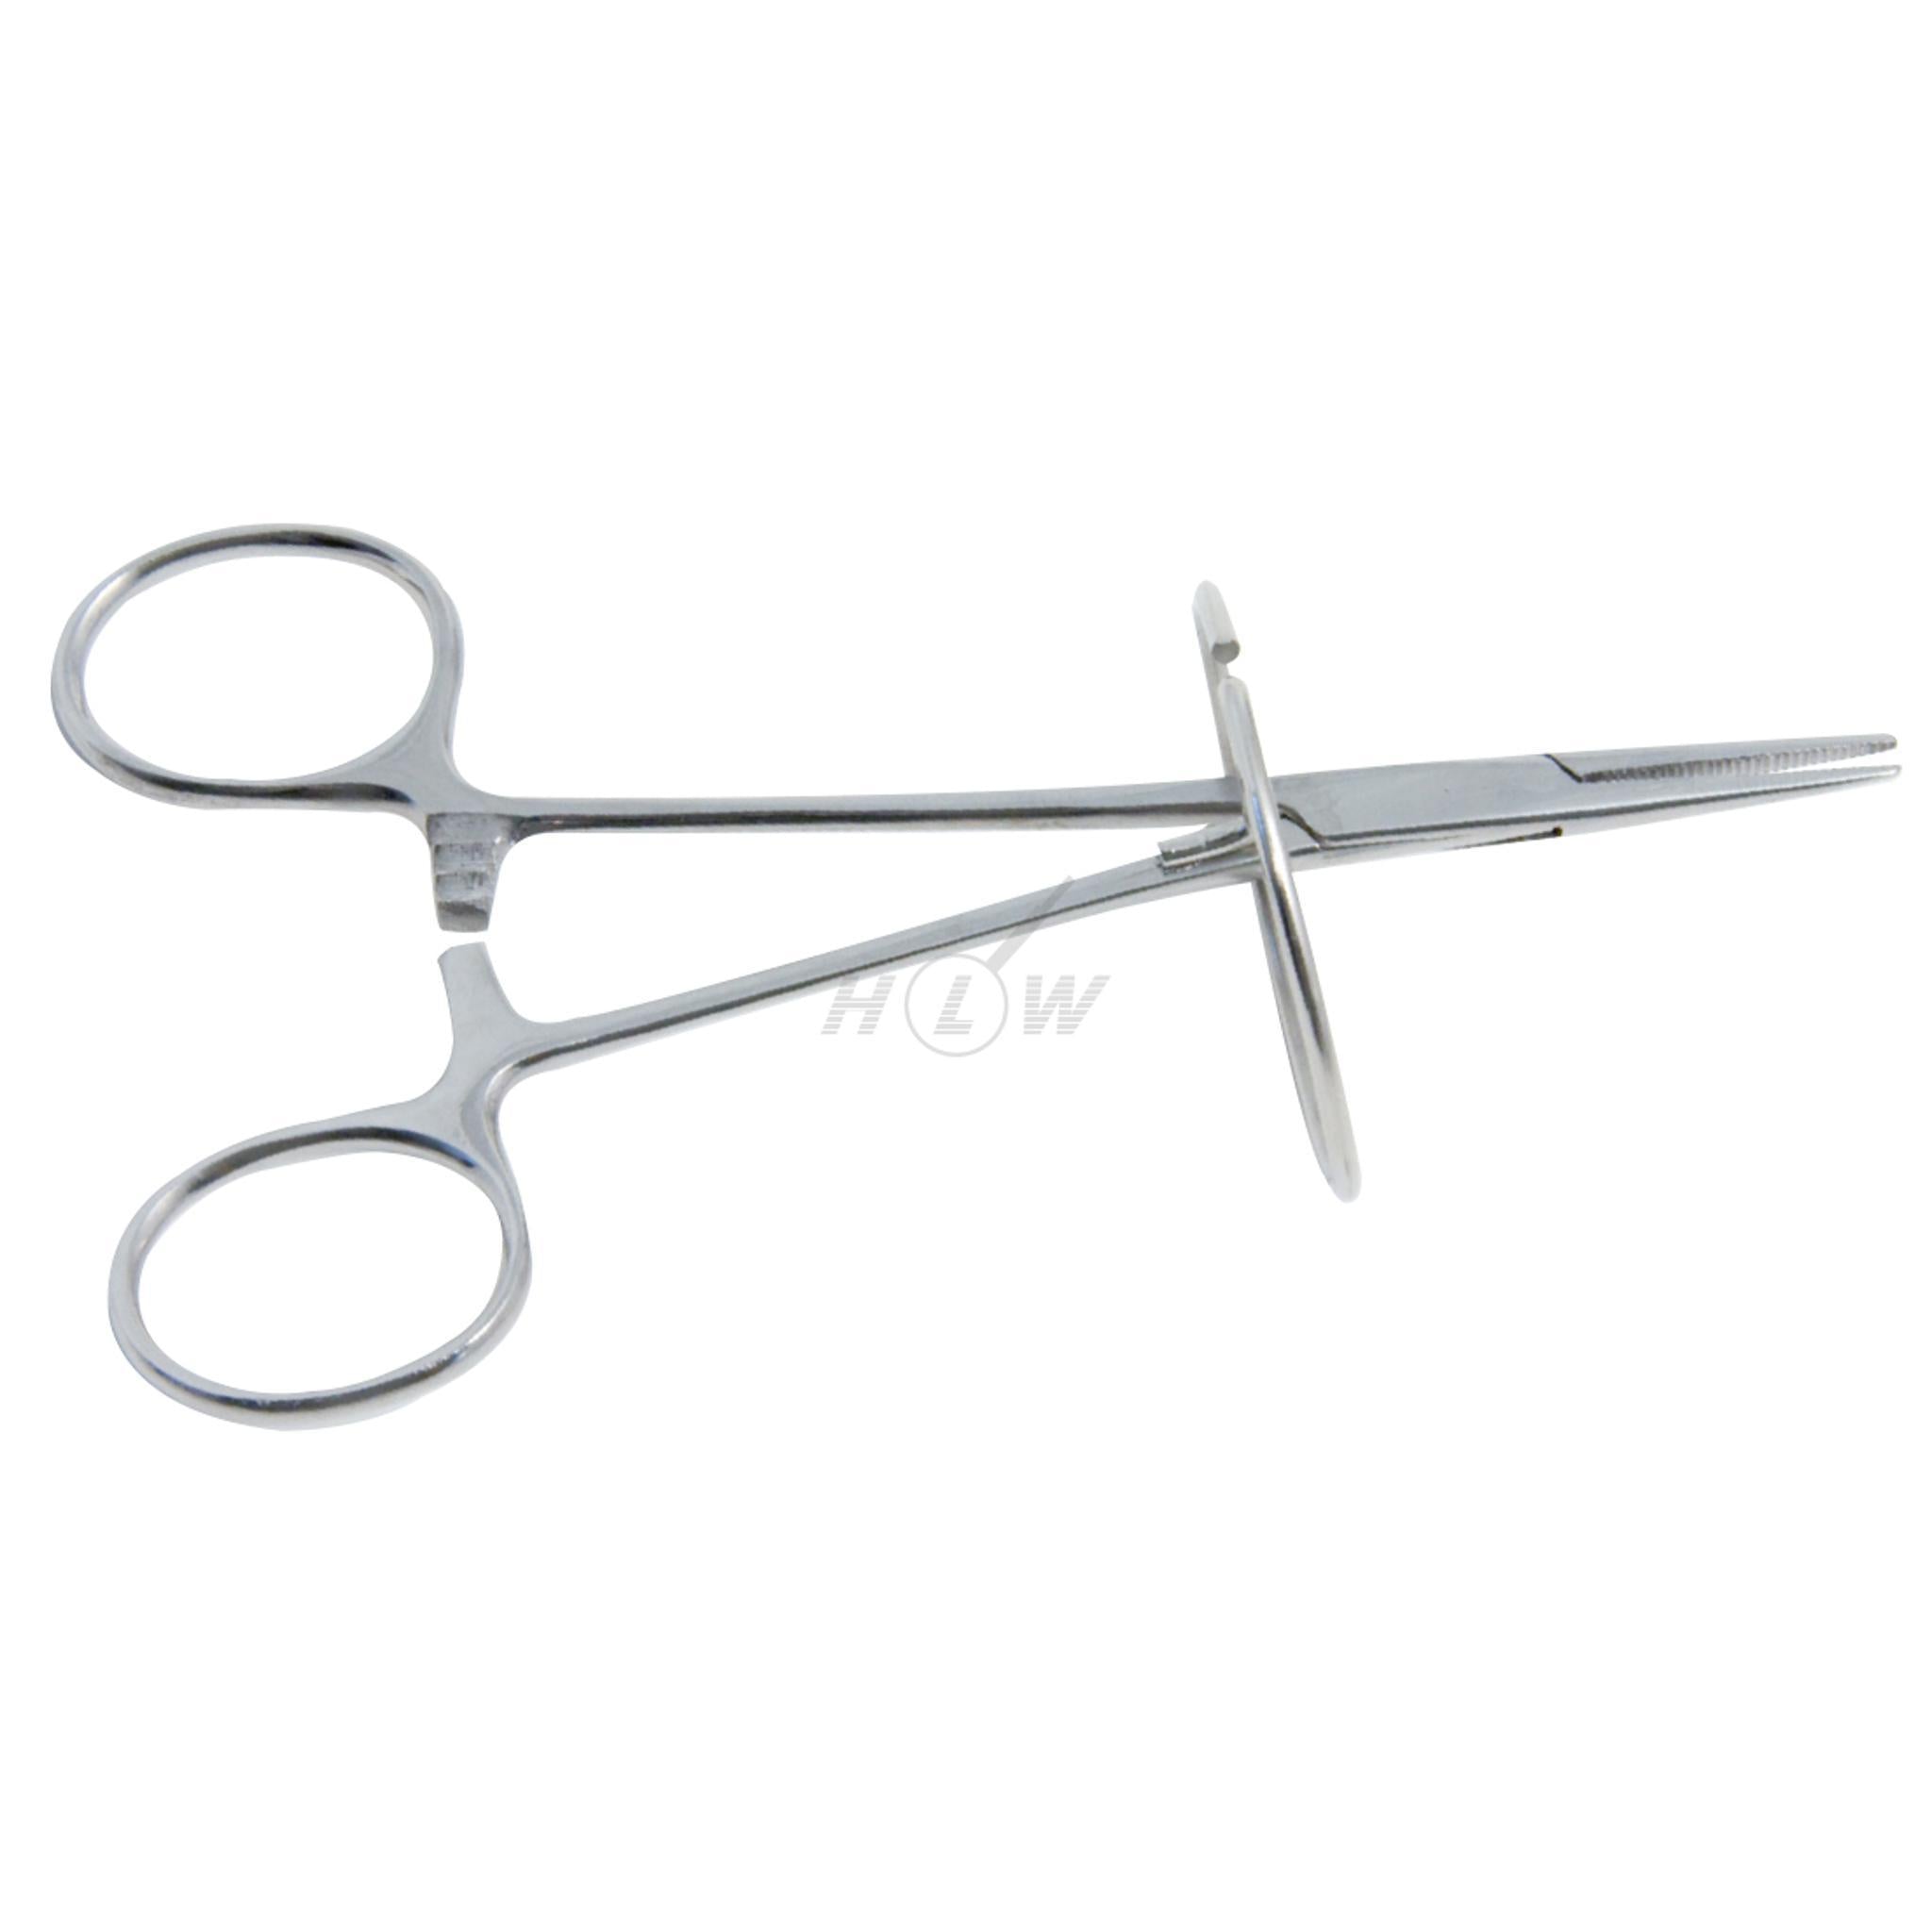 Crown holding forceps Halstead Mosquito 12.5cm straight